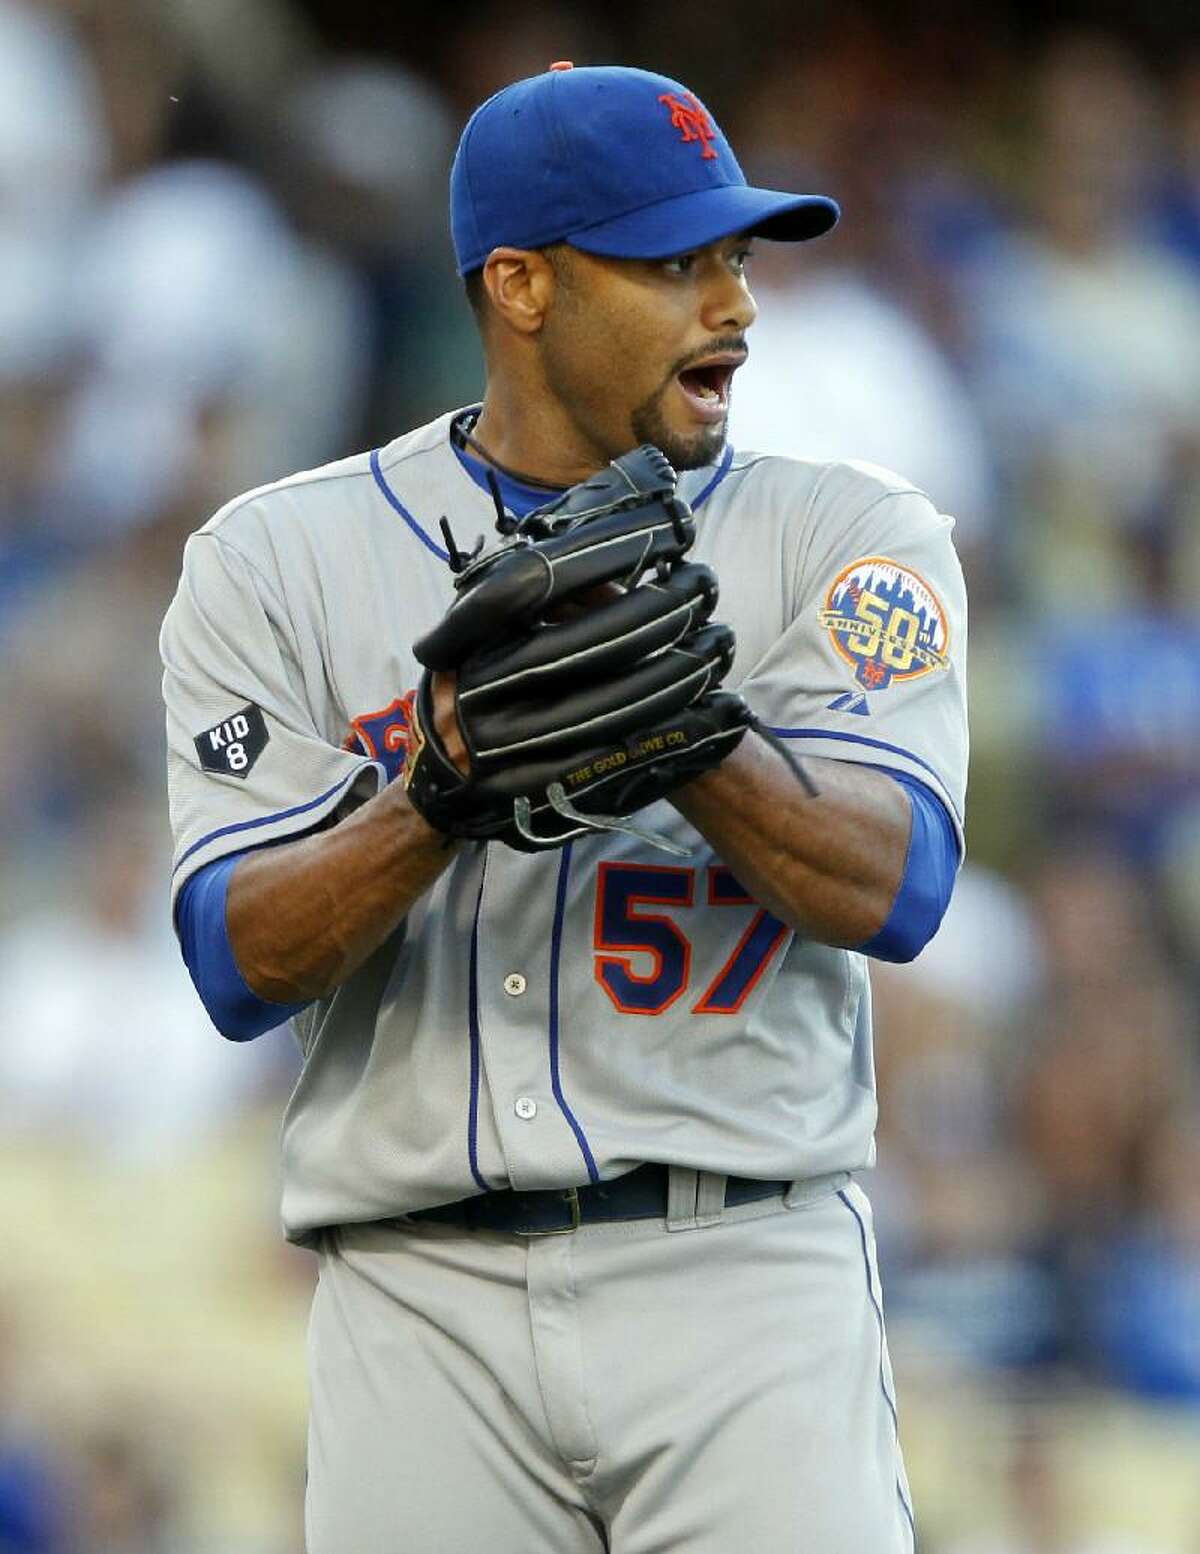 ASSOCIATED PRESS New York Mets starting pitcher Johan Santana (57) lets out a yell after Los Angeles Dodgers' Dee Gordon (not pictured) grounds out to end the eighth inning of Saturday's game in Los Angeles. The Mets won 5-0.